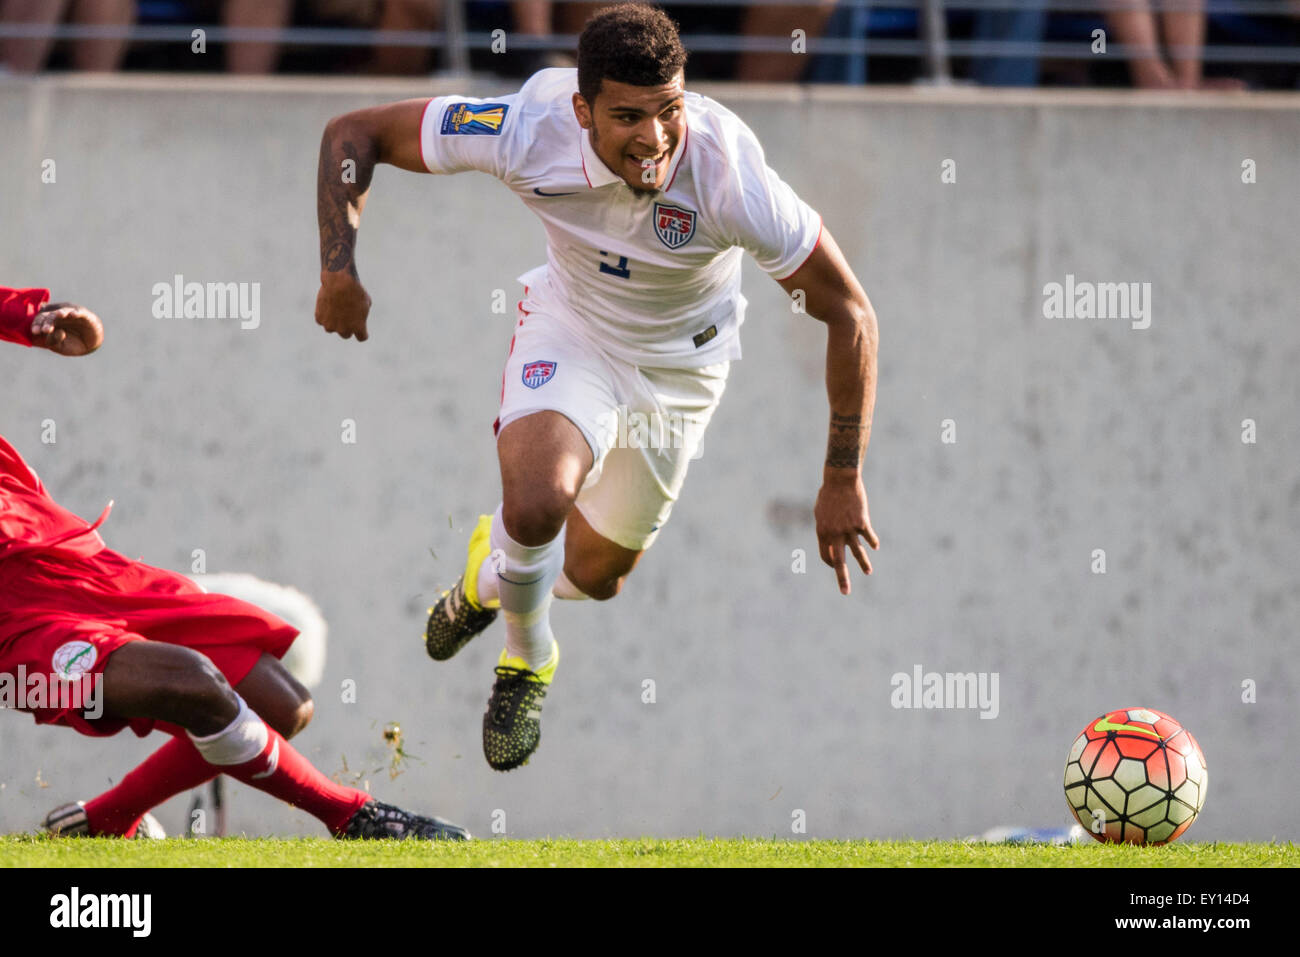 Baltimore, MD, USA. 18th July, 2015. #2 USA M DeAndre Yedlin during the CONCACAF Gold Cup quarterfinal match between USA and Cuba at M&T Bank Stadium in Baltimore, MD. Jacob Kupferman/CSM/Alamy Live News Stock Photo